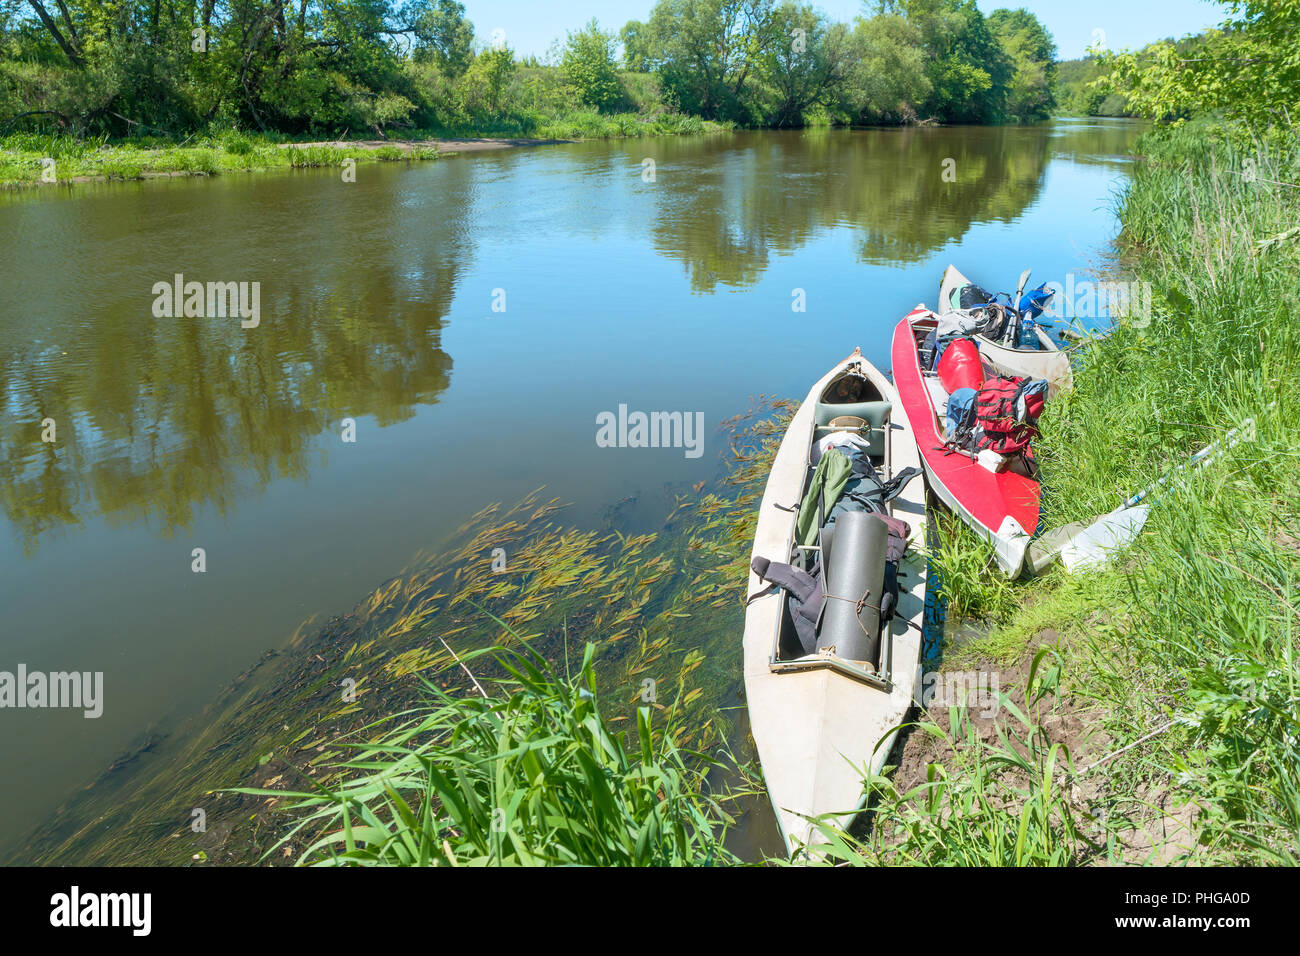 Two kayaks standing in water Stock Photo